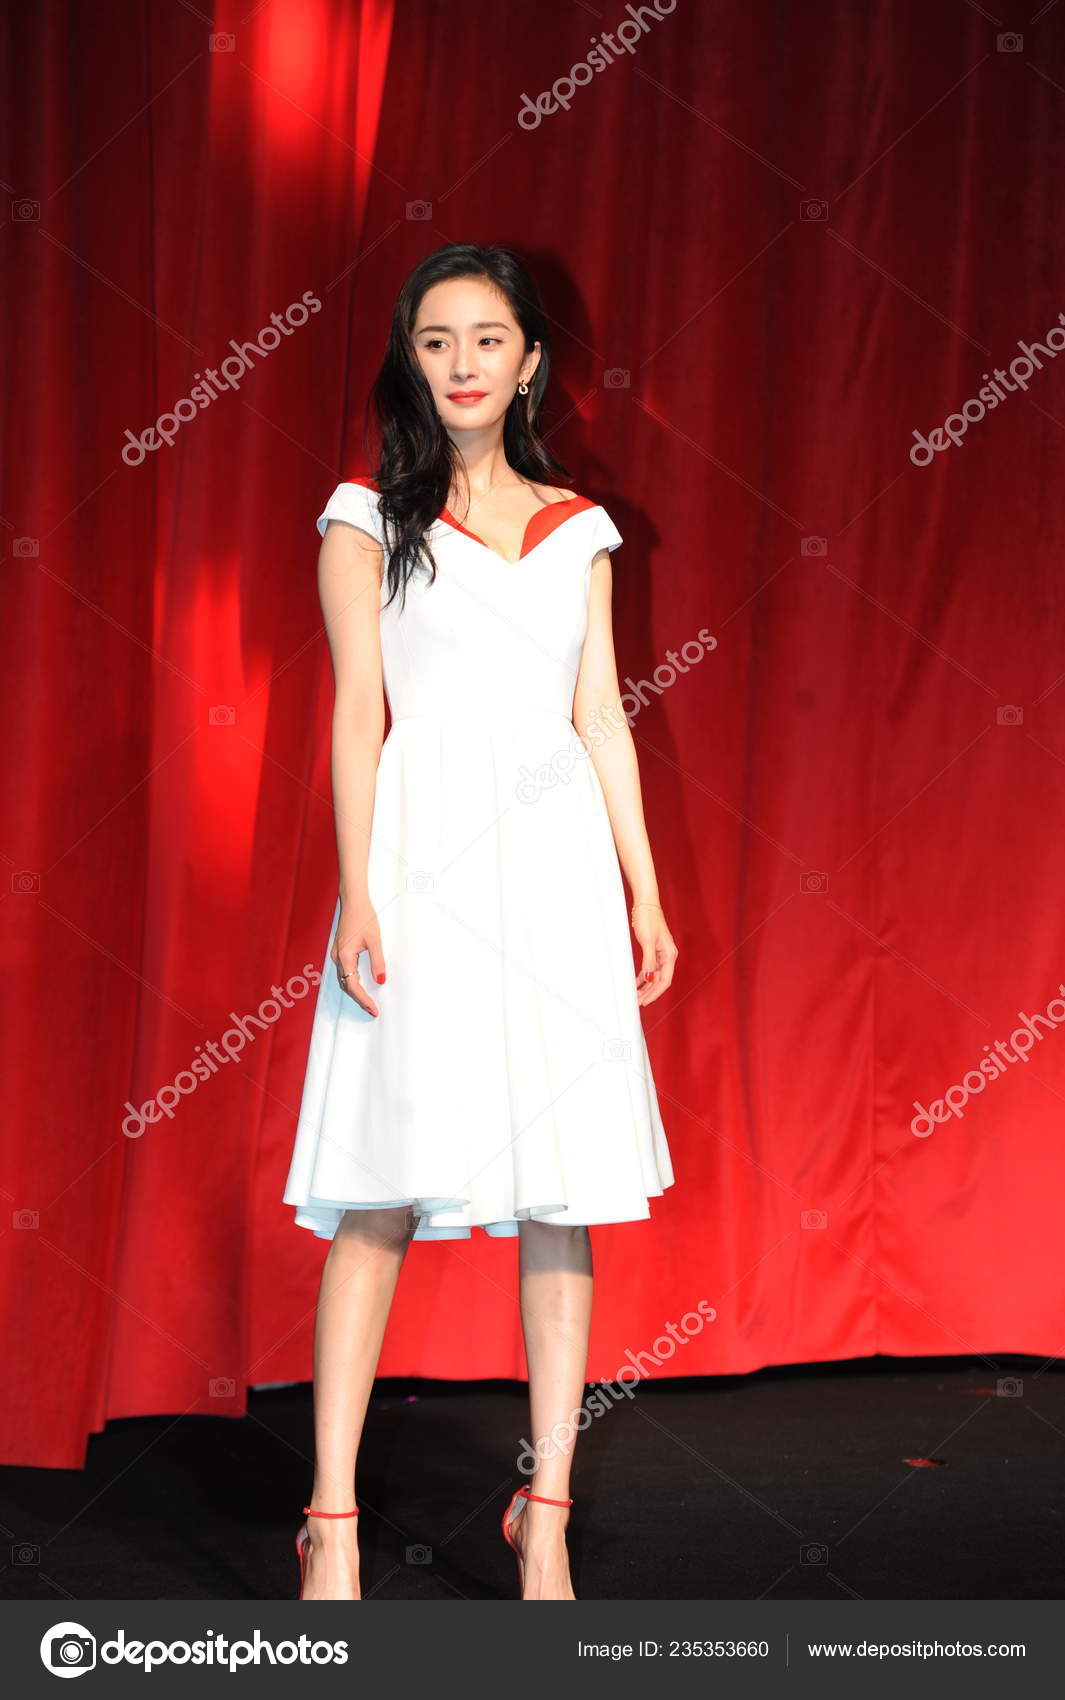 Chinese Actress Yang Attends Promotional Event Estee Lauder Shanghai China  – Stock Editorial Photo © ChinaImages #235353660